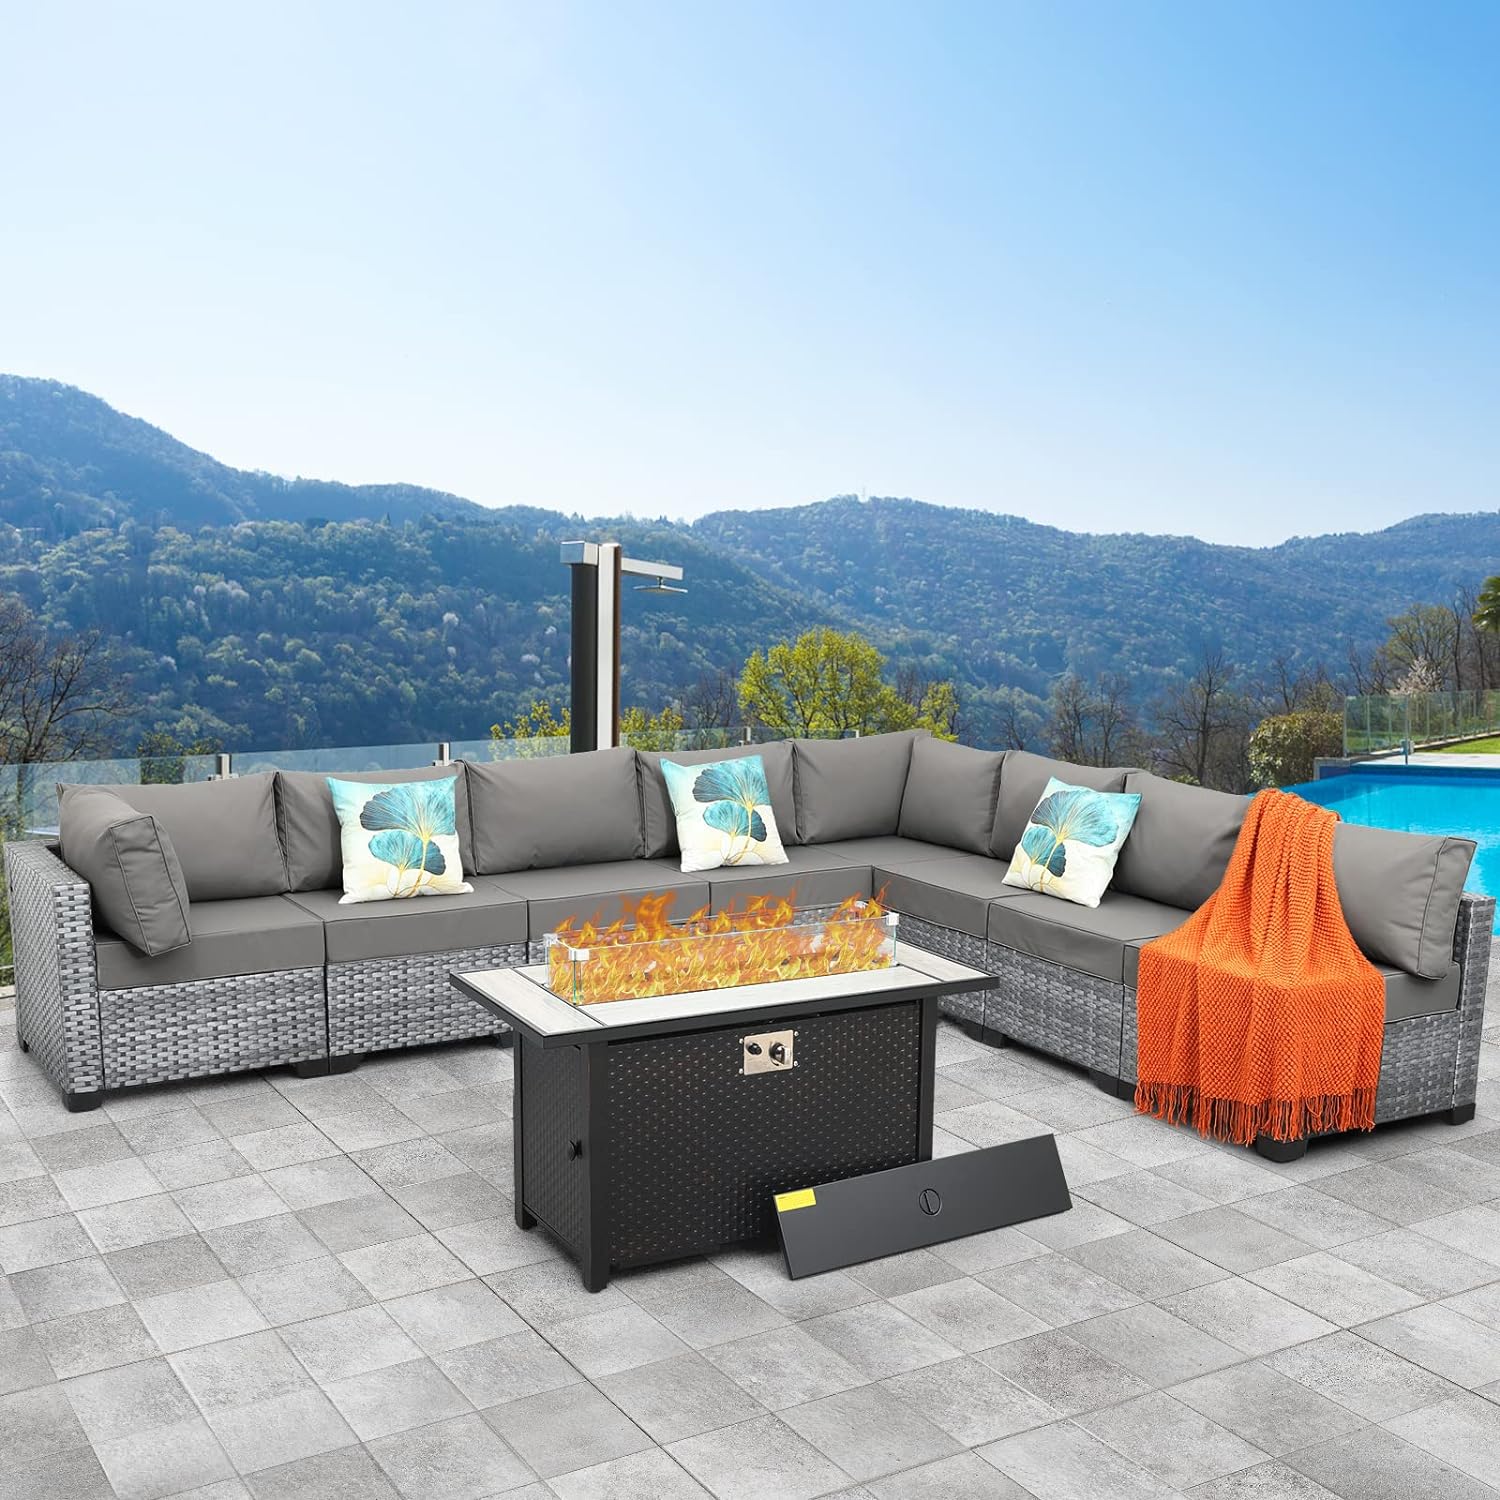 9 Pcs Patio Sectional Outdoor Furniture 45 Inches Fire Pit Outdoor Sectional Patio Furniture 60000 BTU Steel Propane Fire Pit Table Glass Wind Guard No-Slip 5 Cushions Waterproof Covers, Grey